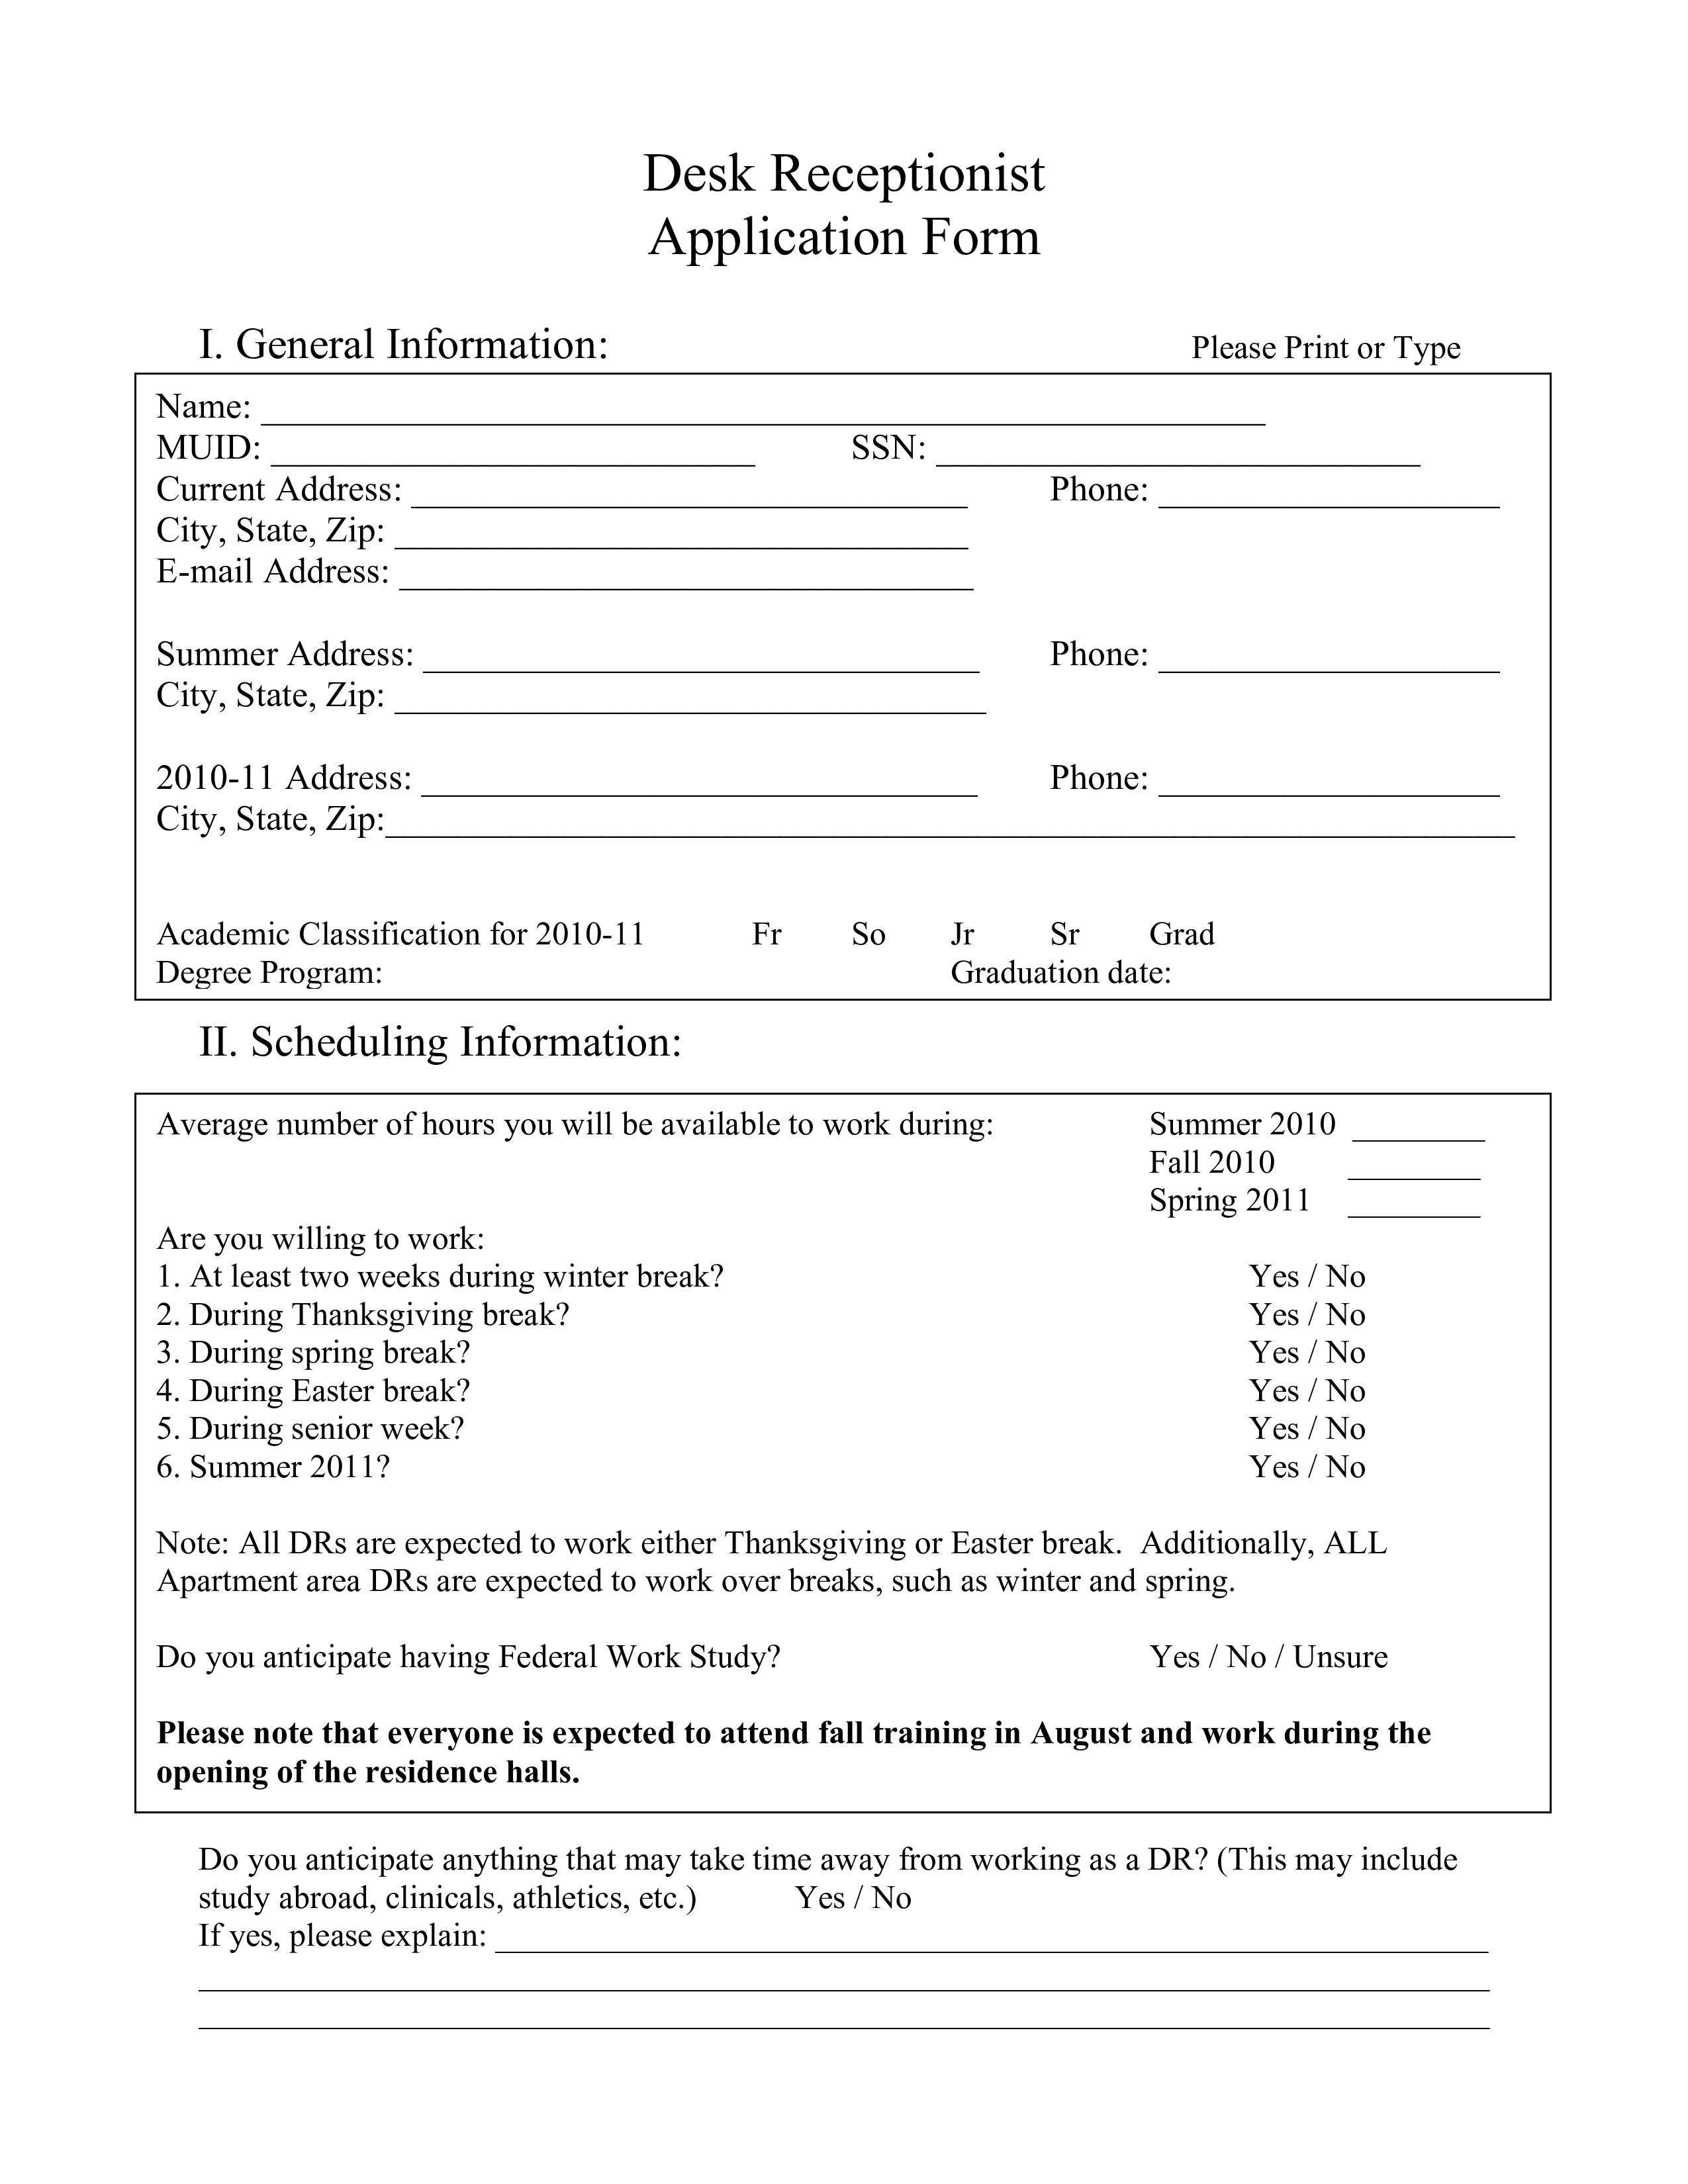 Application form for applying for a job